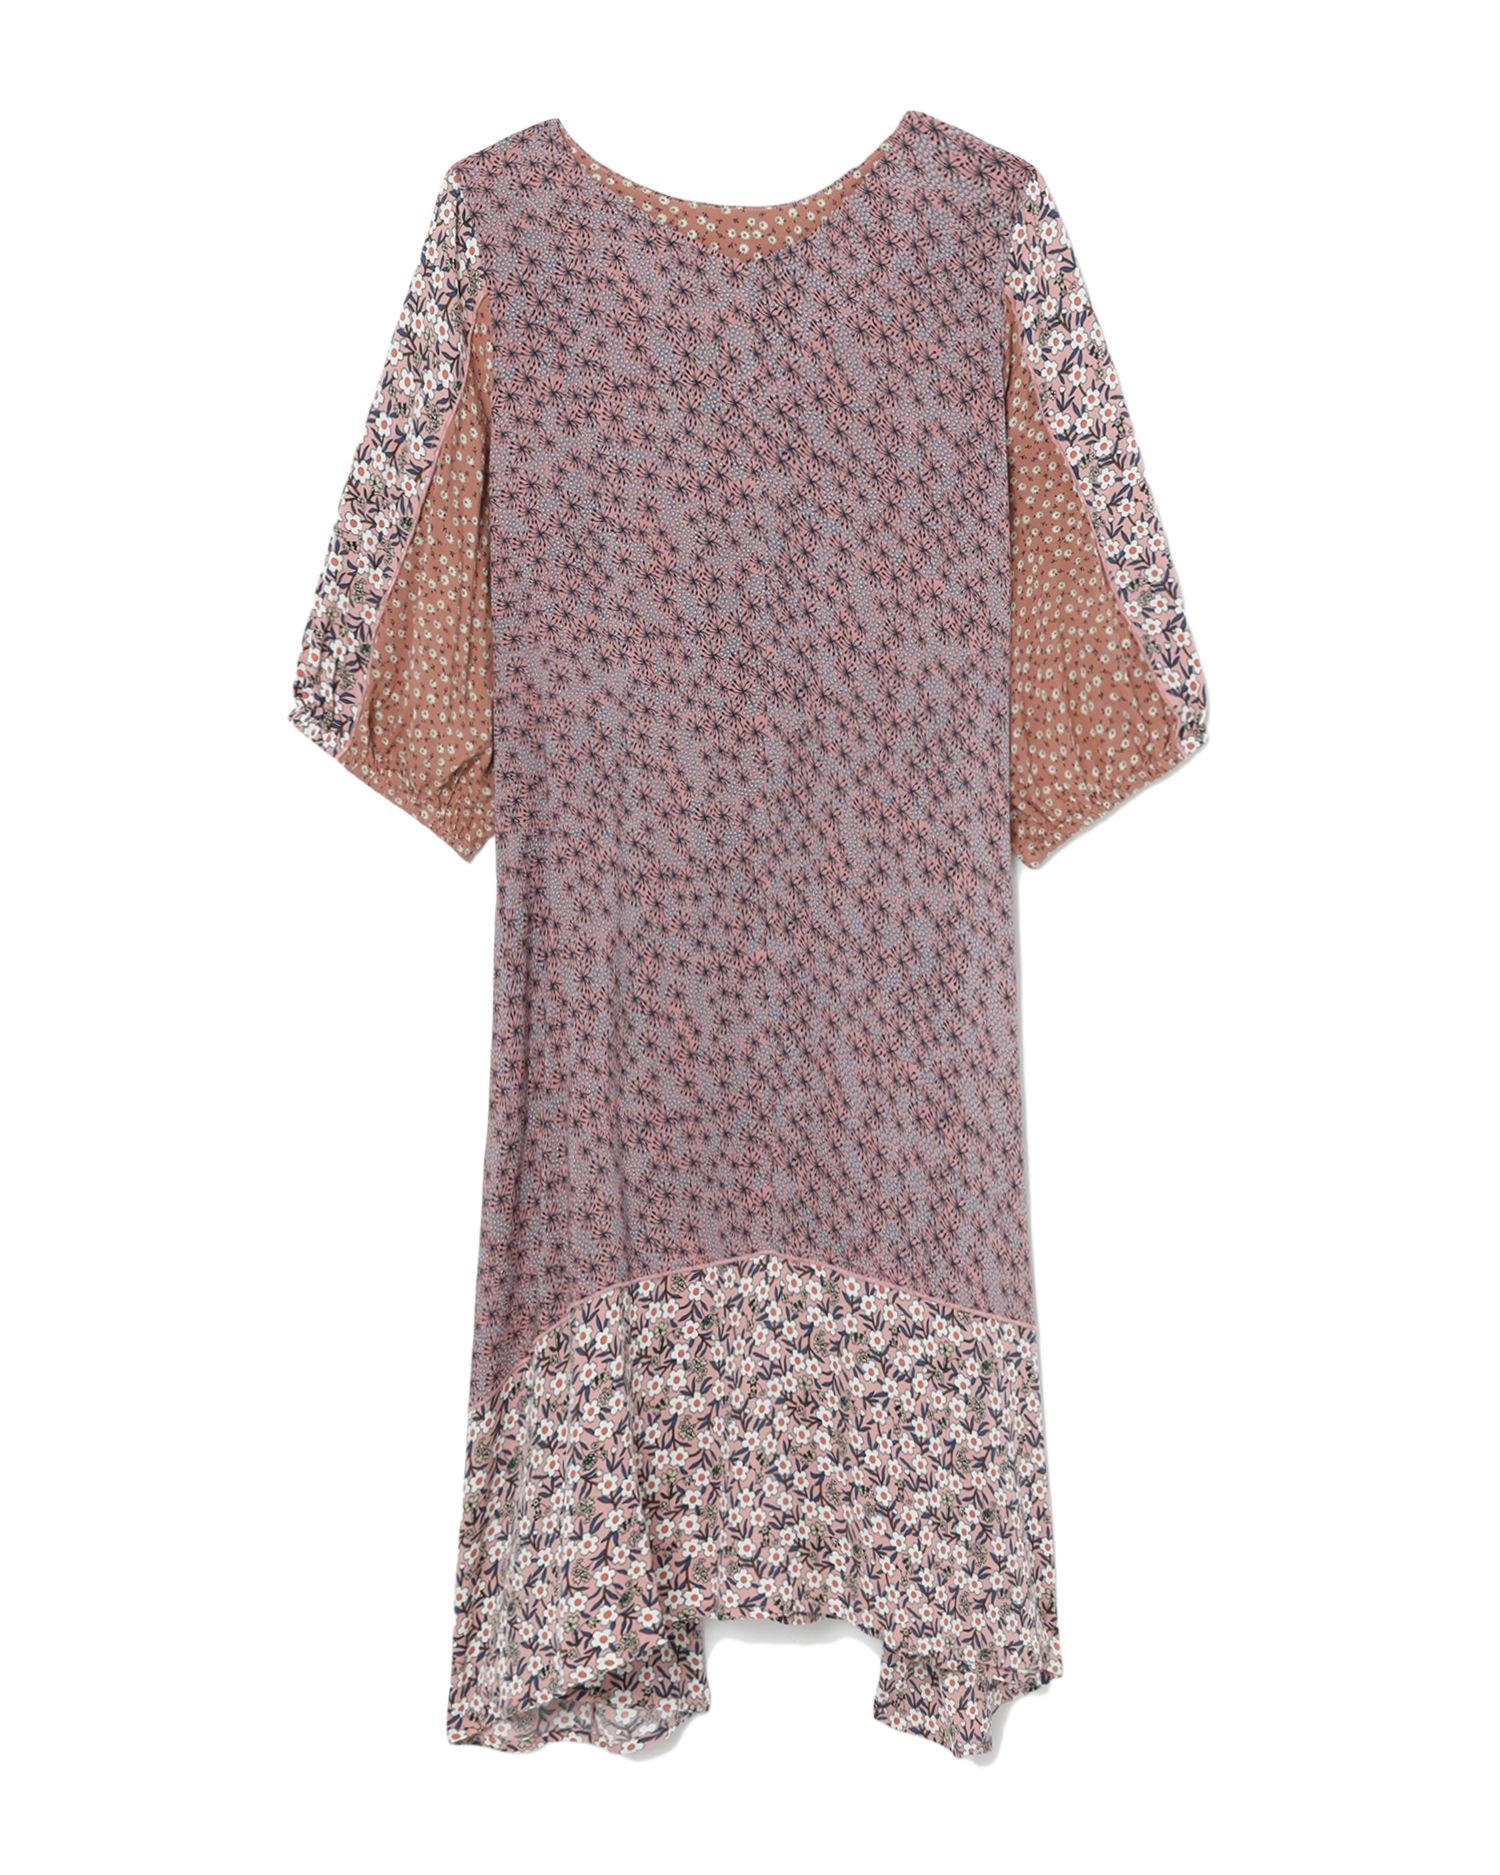 Multi-pattern knee length dress by AS KNOW AS